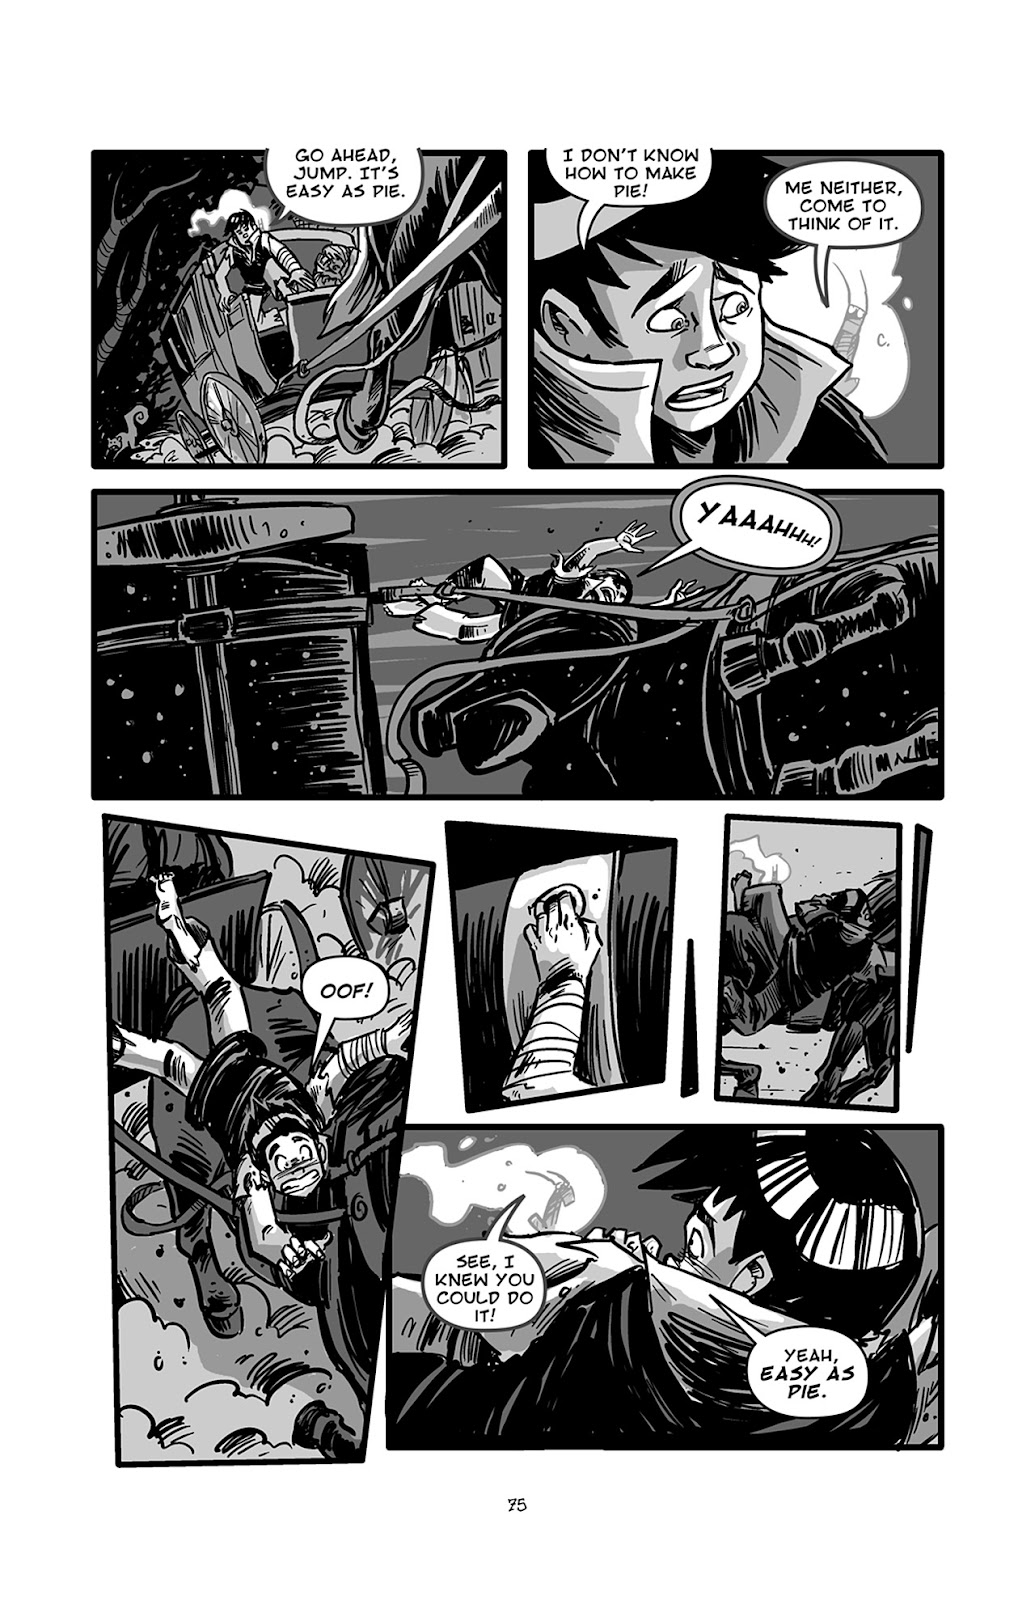 Pinocchio: Vampire Slayer - Of Wood and Blood issue 4 - Page 2